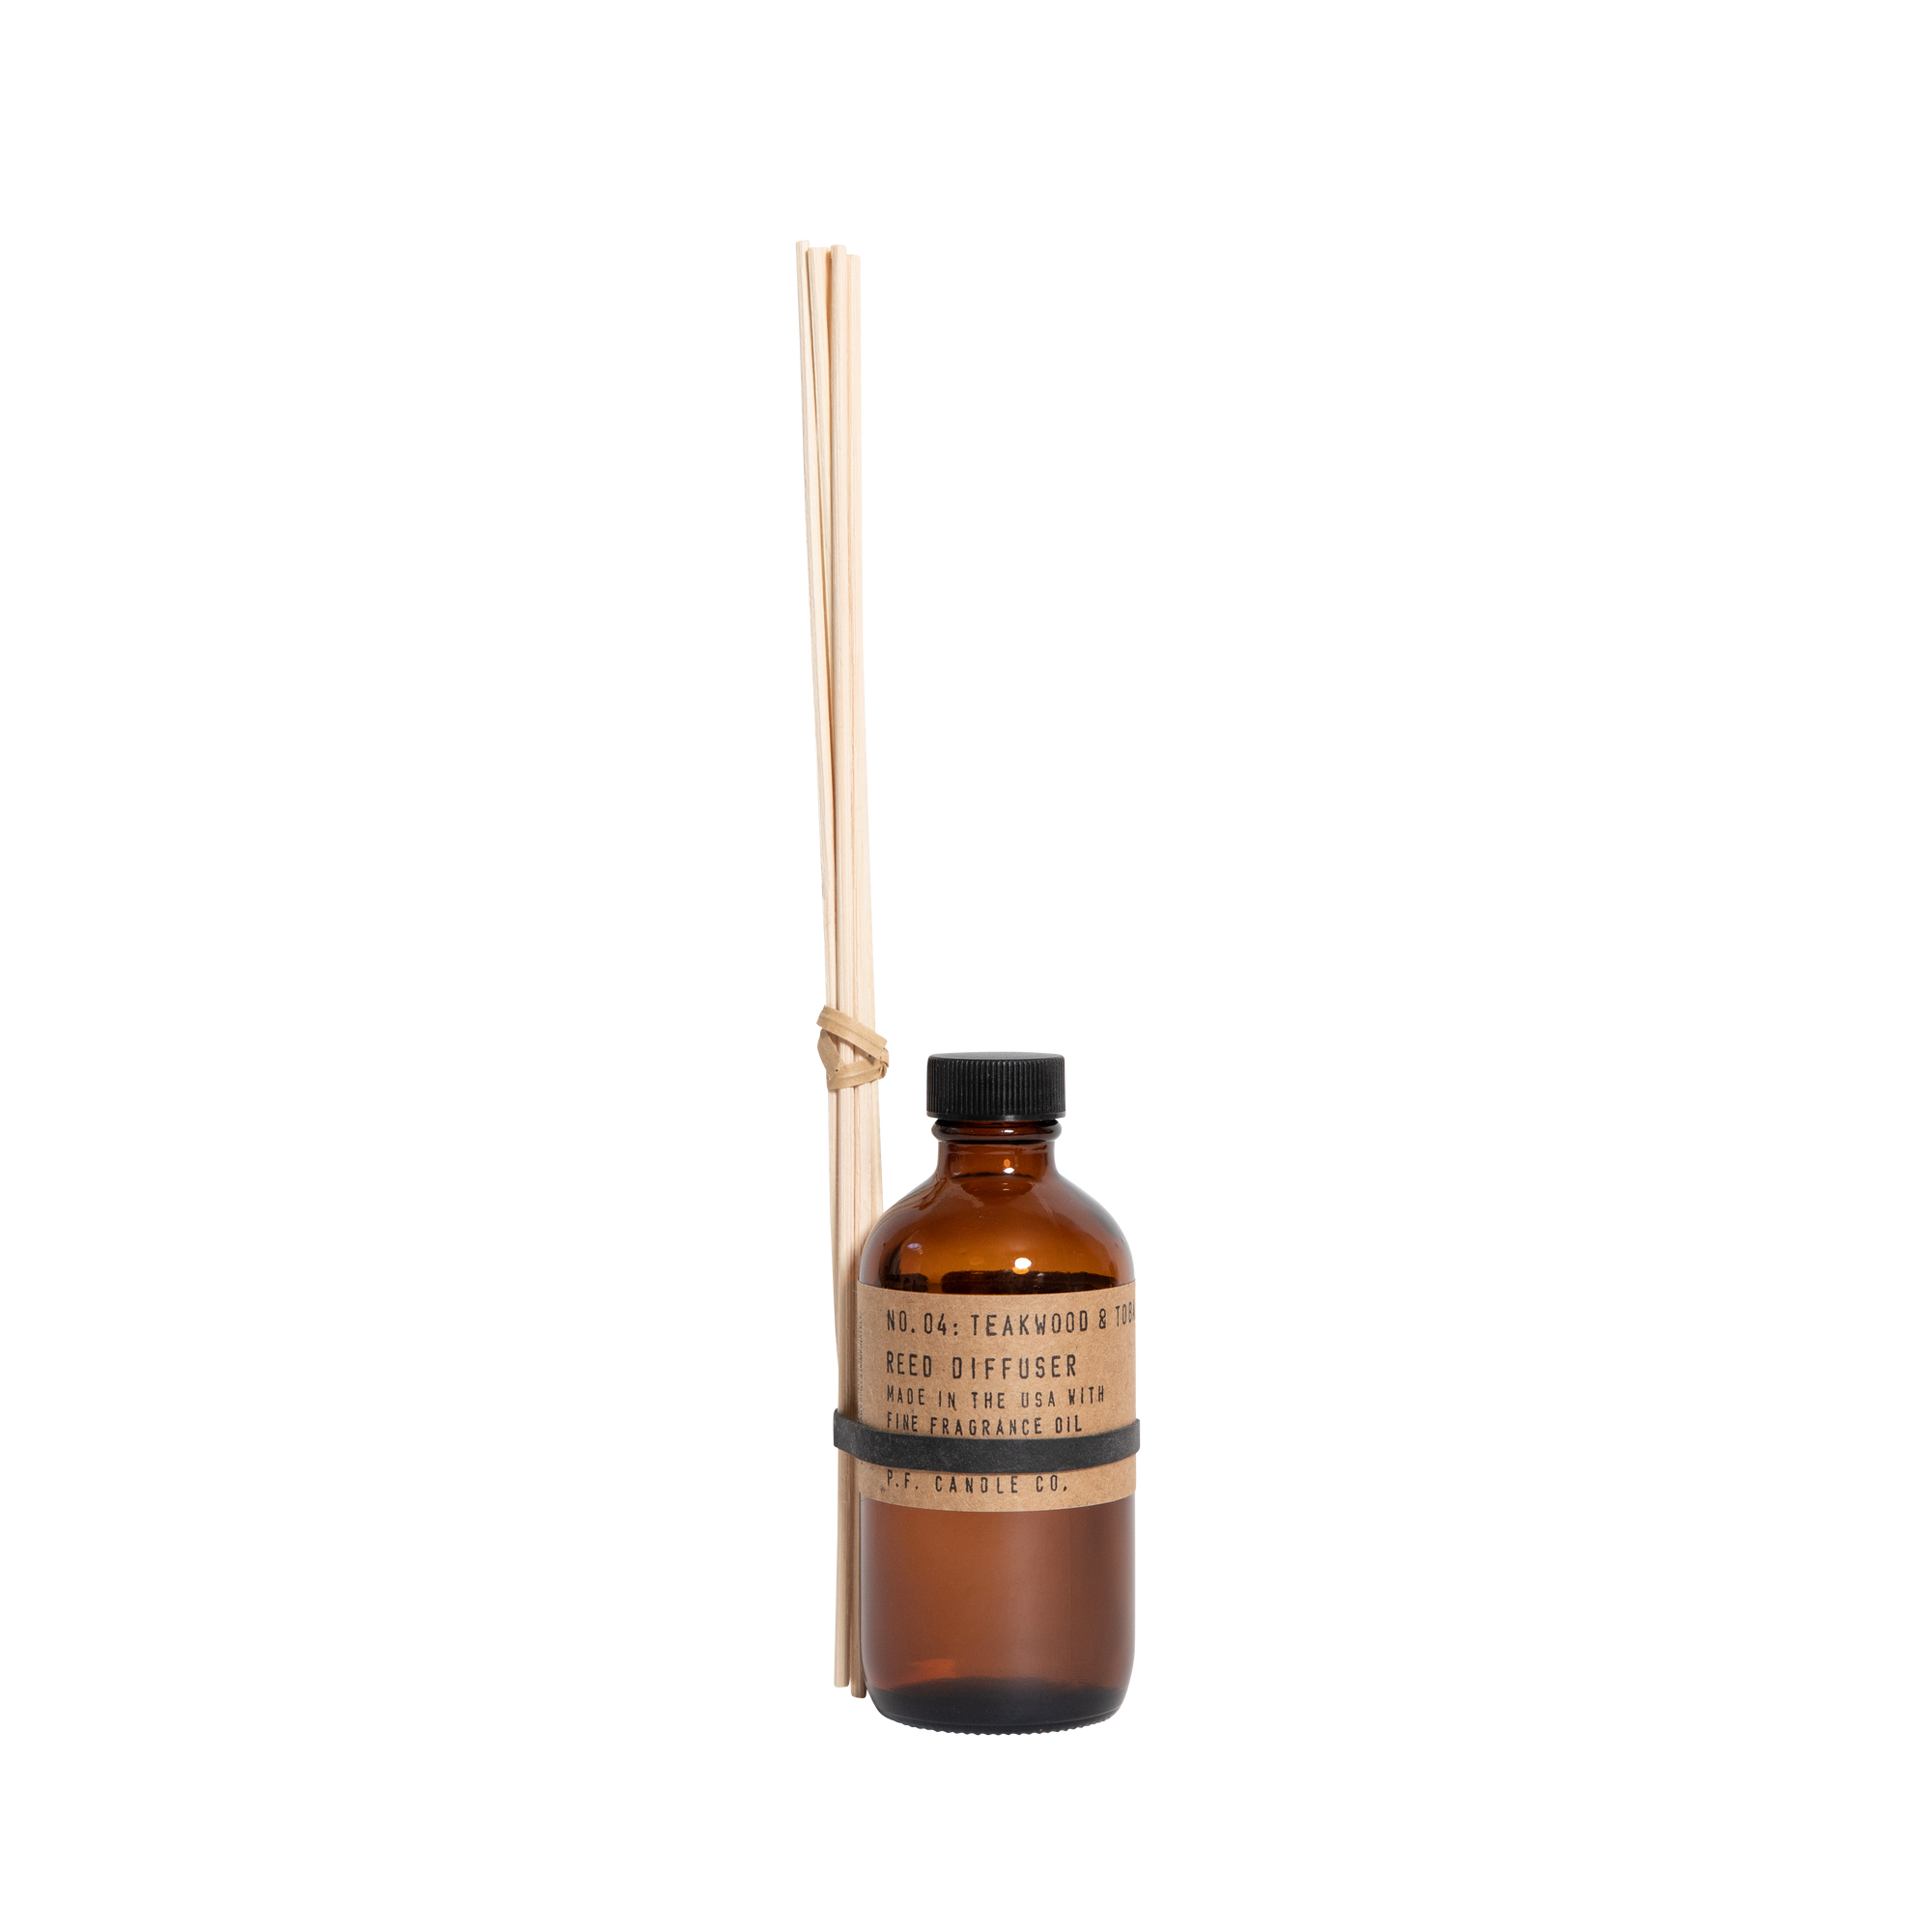 REED DIFFUSER Teakwd & Tobacco